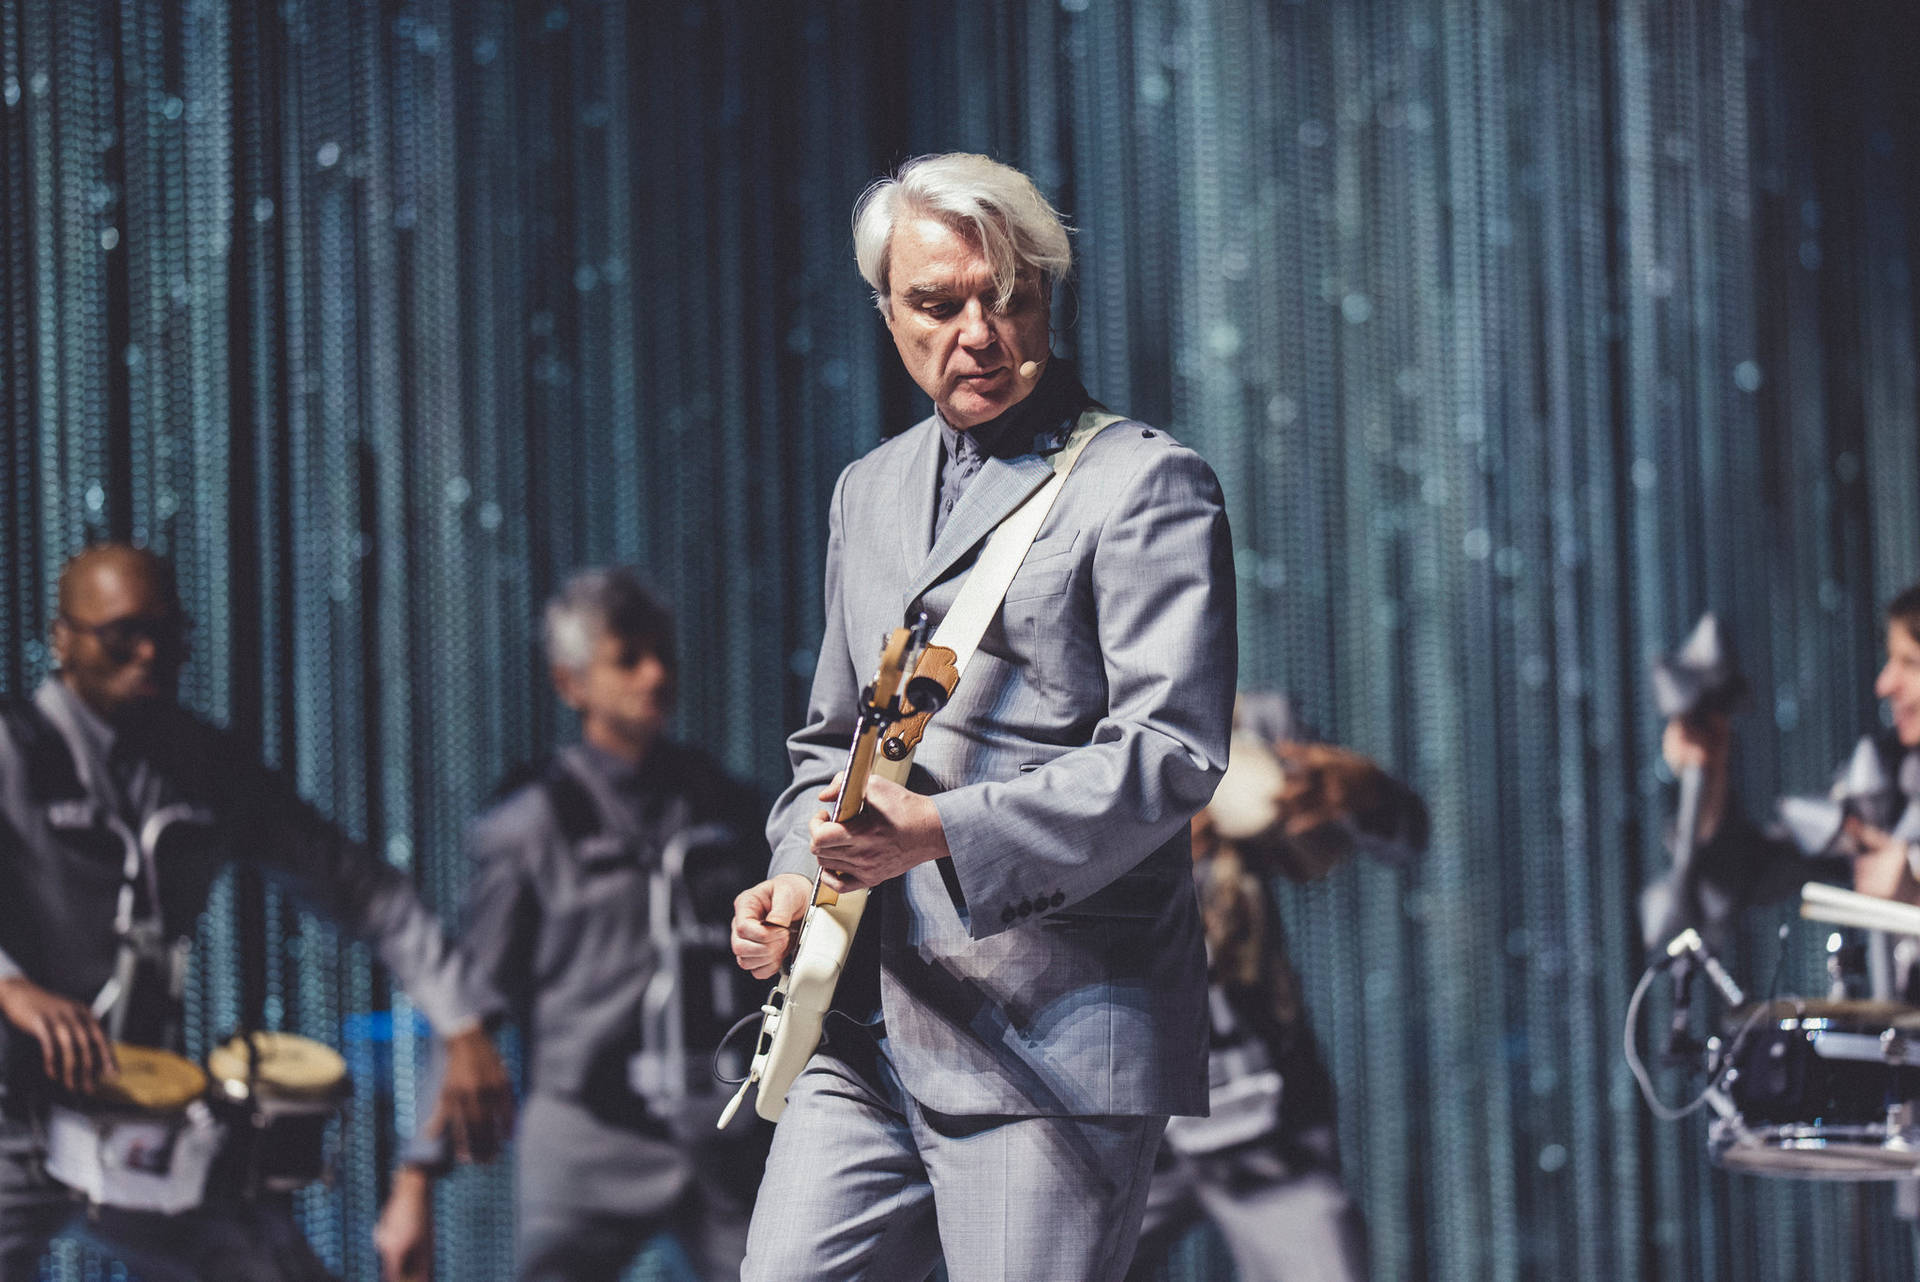 David Byrne Guitar Stage Performance Photography Wallpaper